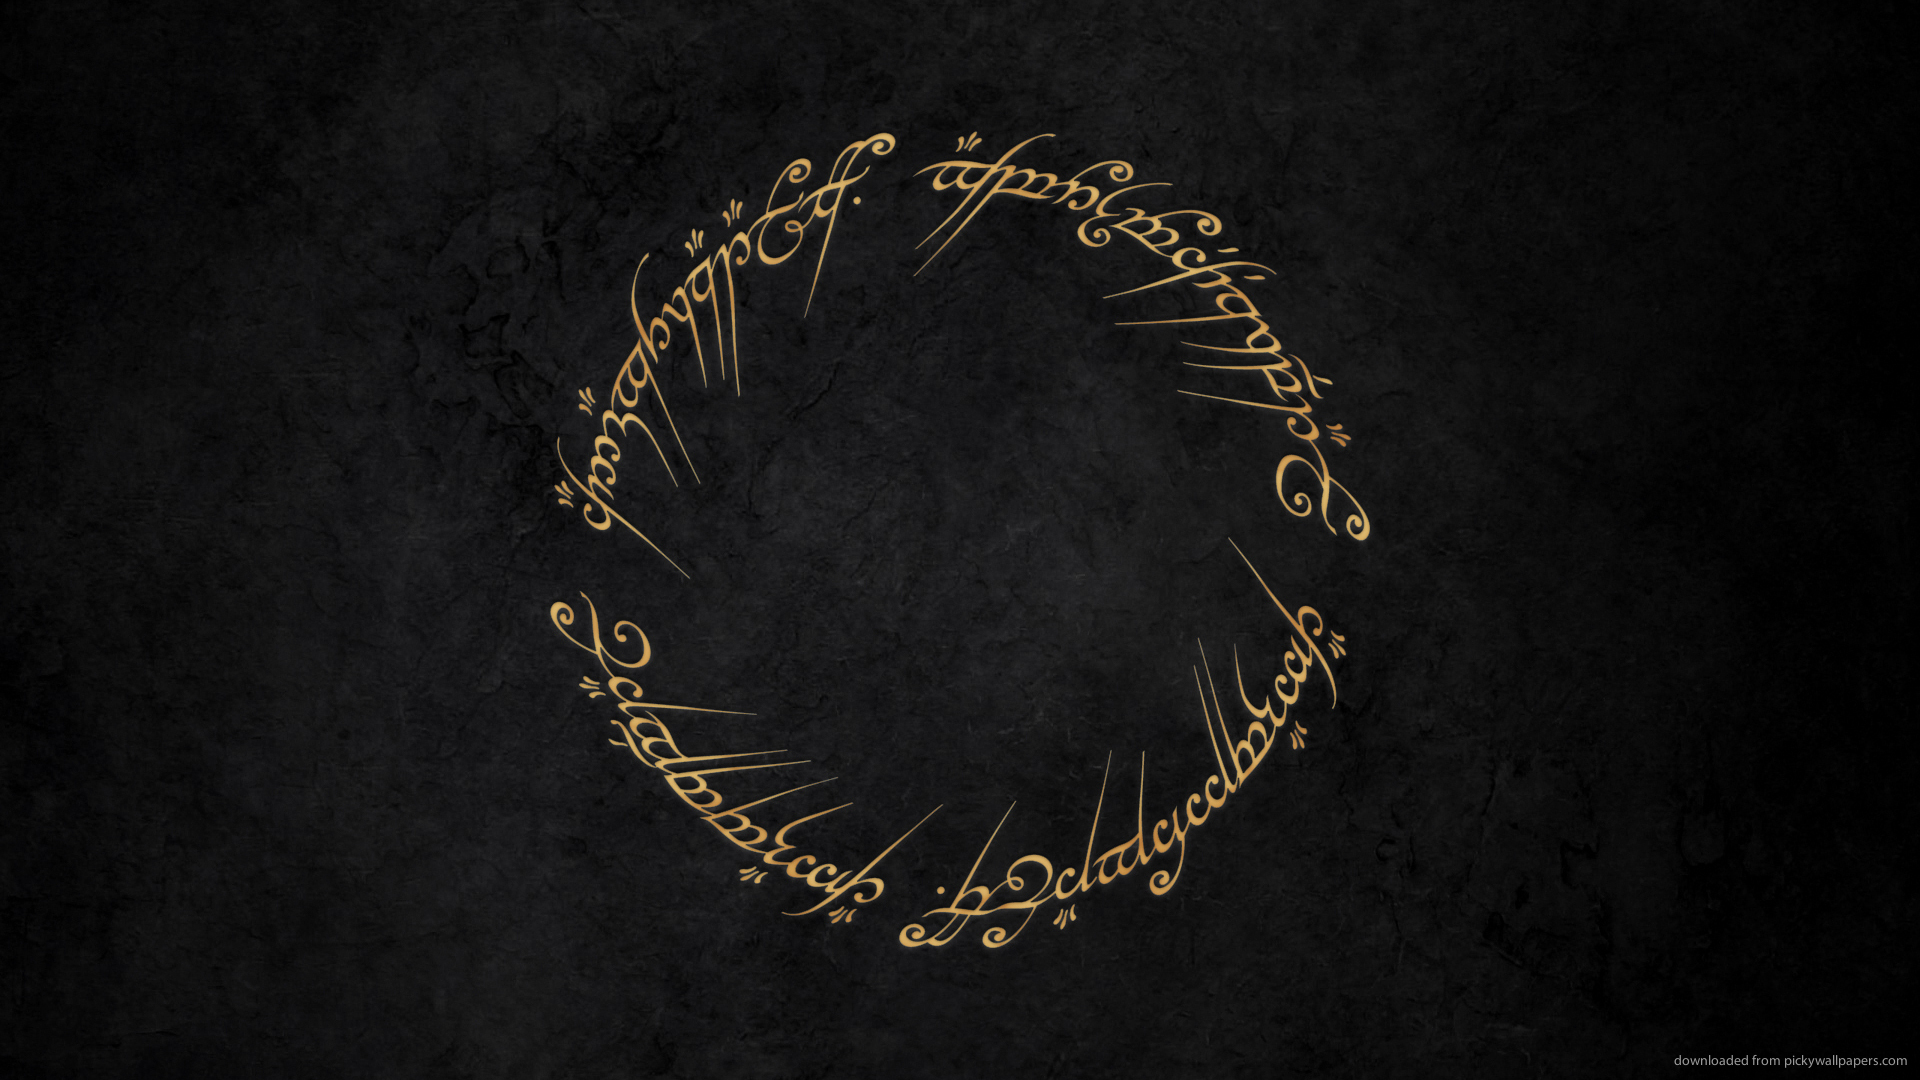 Lord Of The Rings iPhone Wallpaper